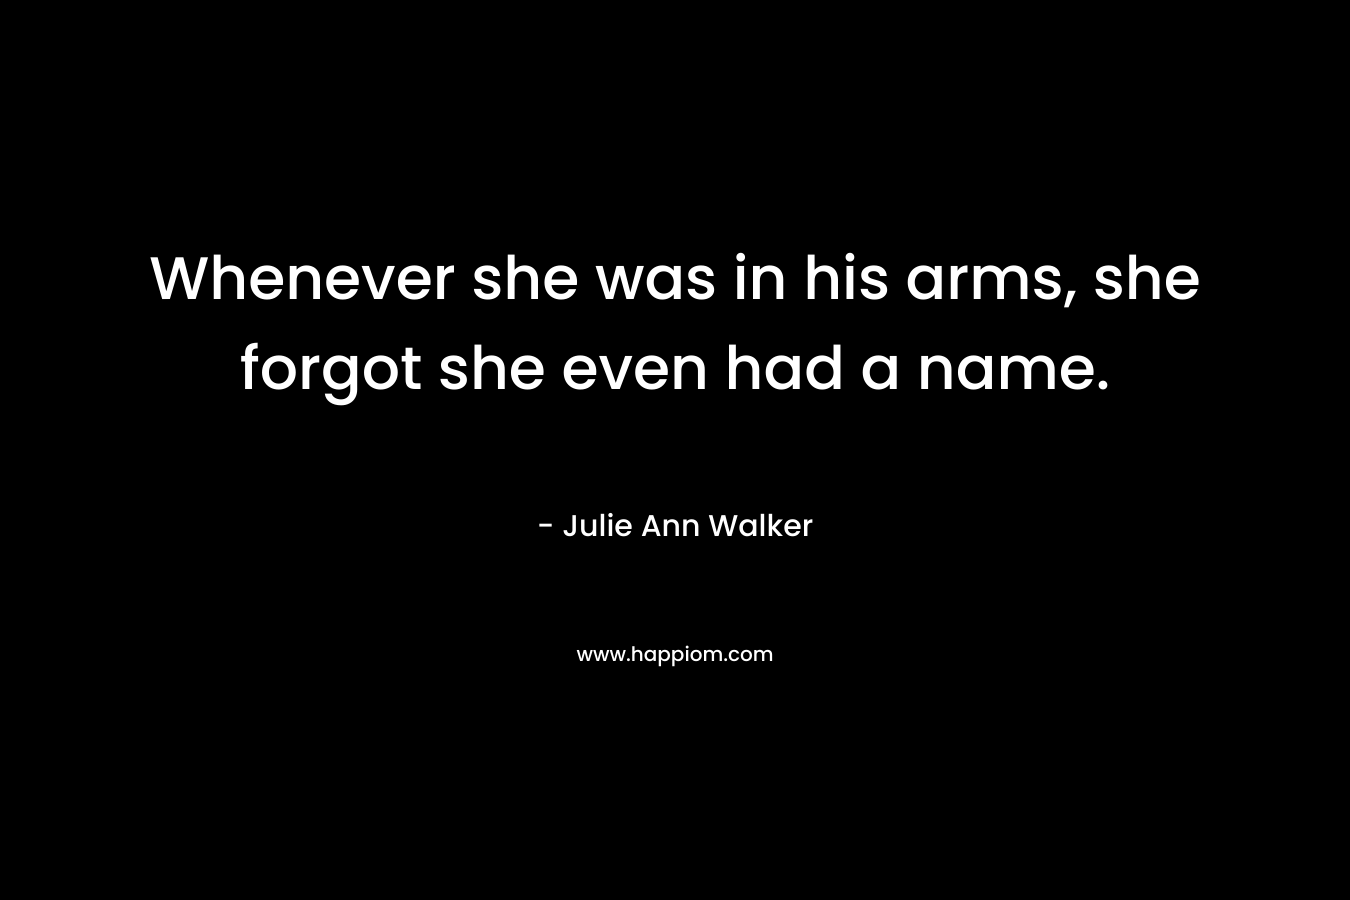 Whenever she was in his arms, she forgot she even had a name. – Julie Ann Walker